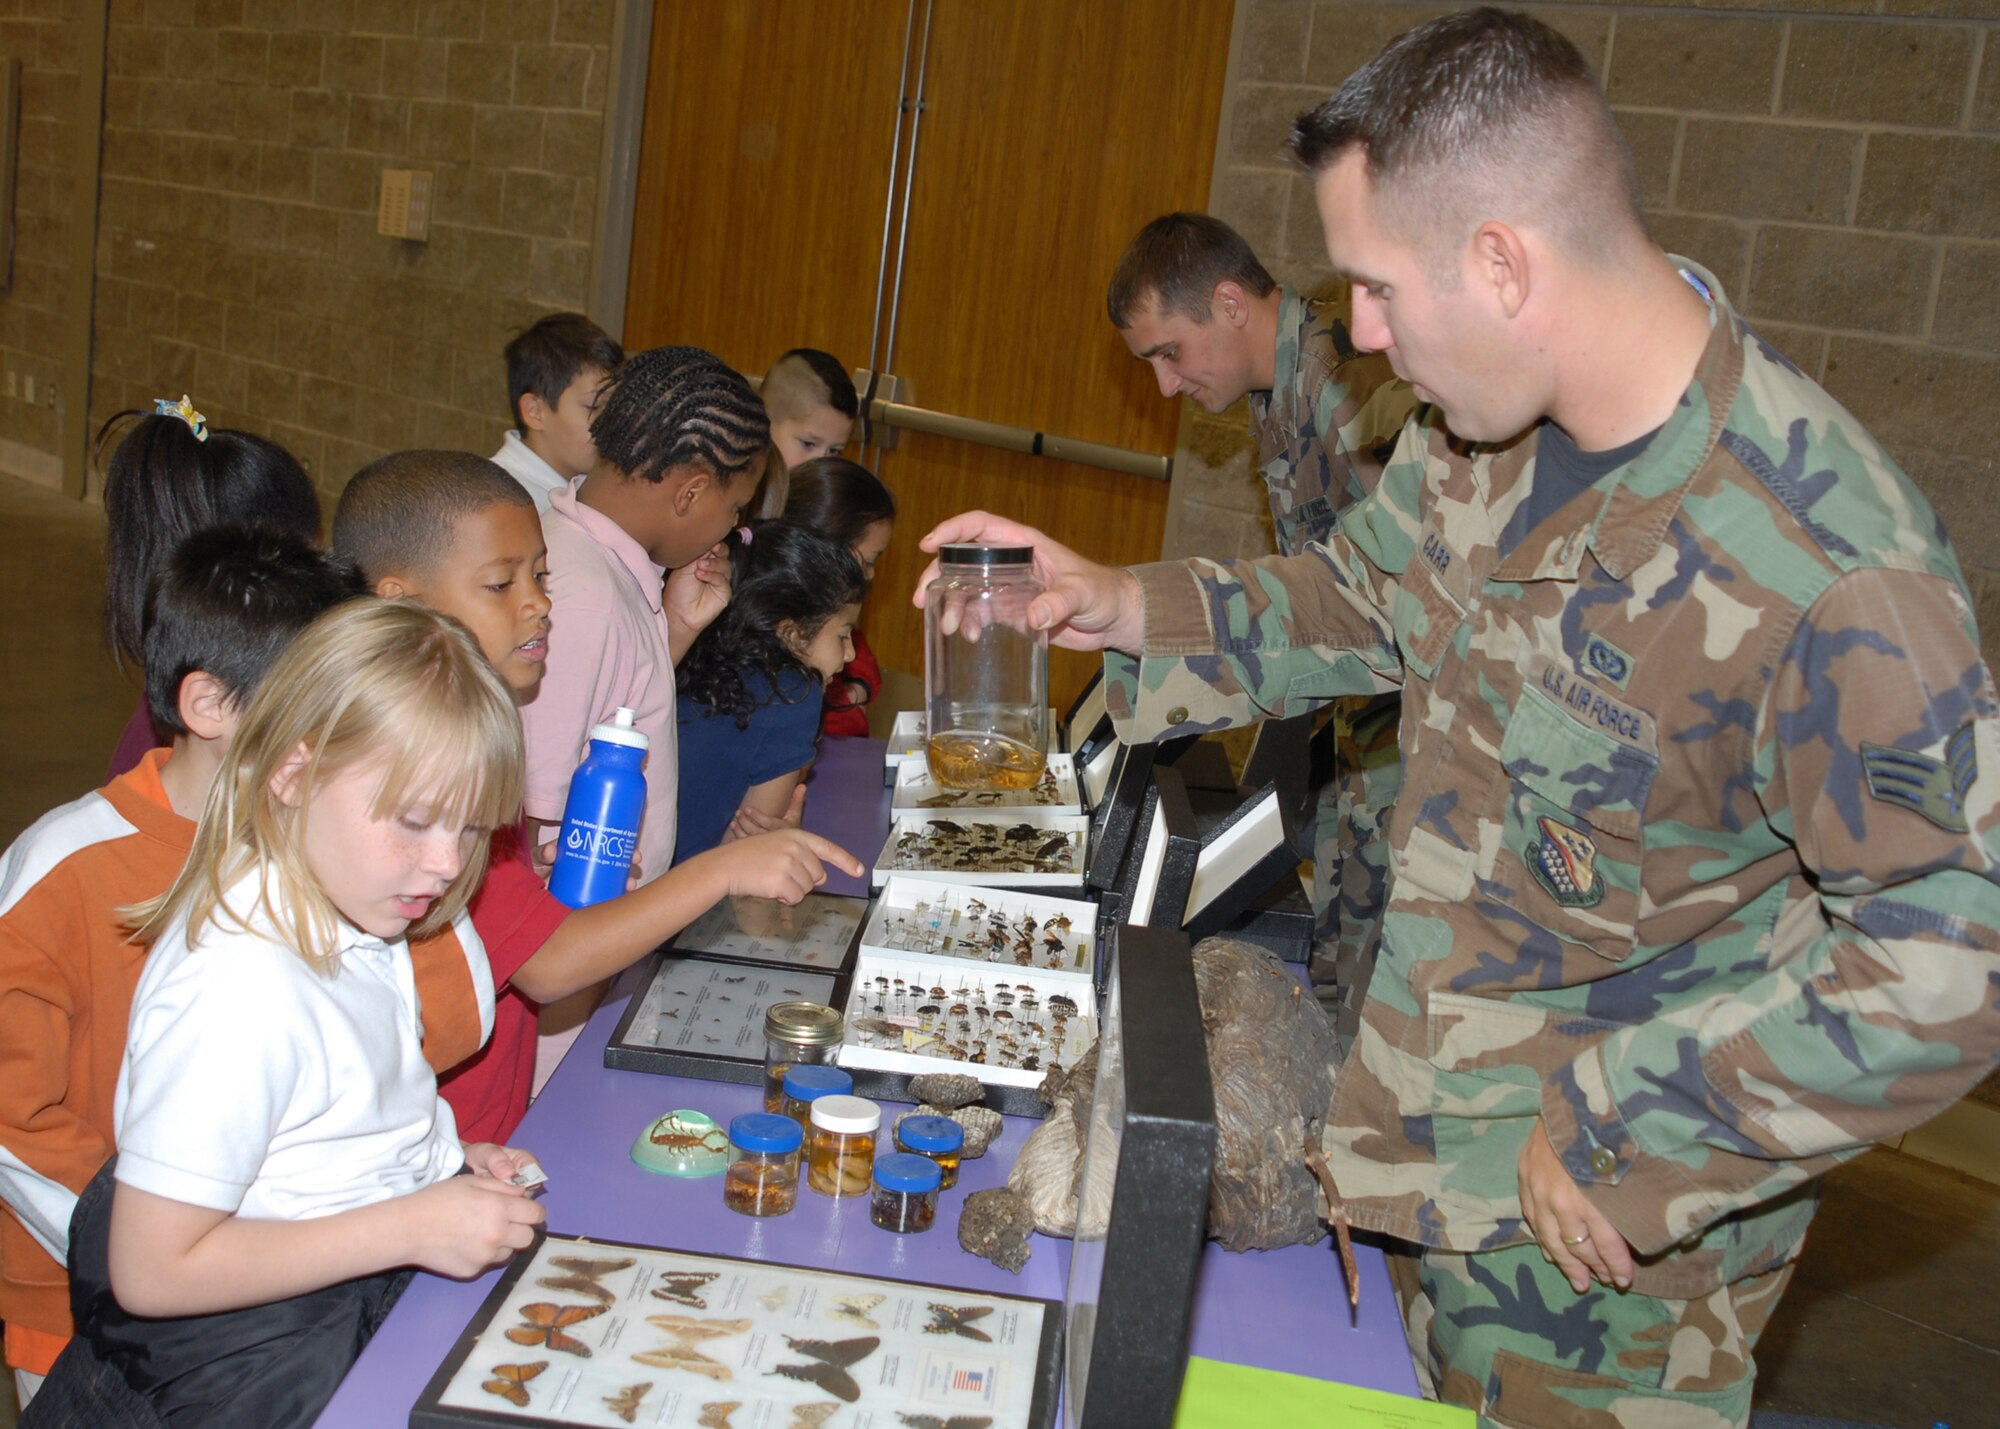 Senior Airman Andrew Carr and Staff Sgt. Zachariah Bingham of the 82nd Civil Engineering Squadron speak to children from a mixture of local schools in observance of Earth Day April 14 at the Multi-Purpose Event Center in Wichita Falls, Texas.  Airman Carr and Sergeant Bingham talked to the children about the different types of insects and arachnids that their exhibit displayed. (U.S. Air Force photo/Lou Anne Sledge)